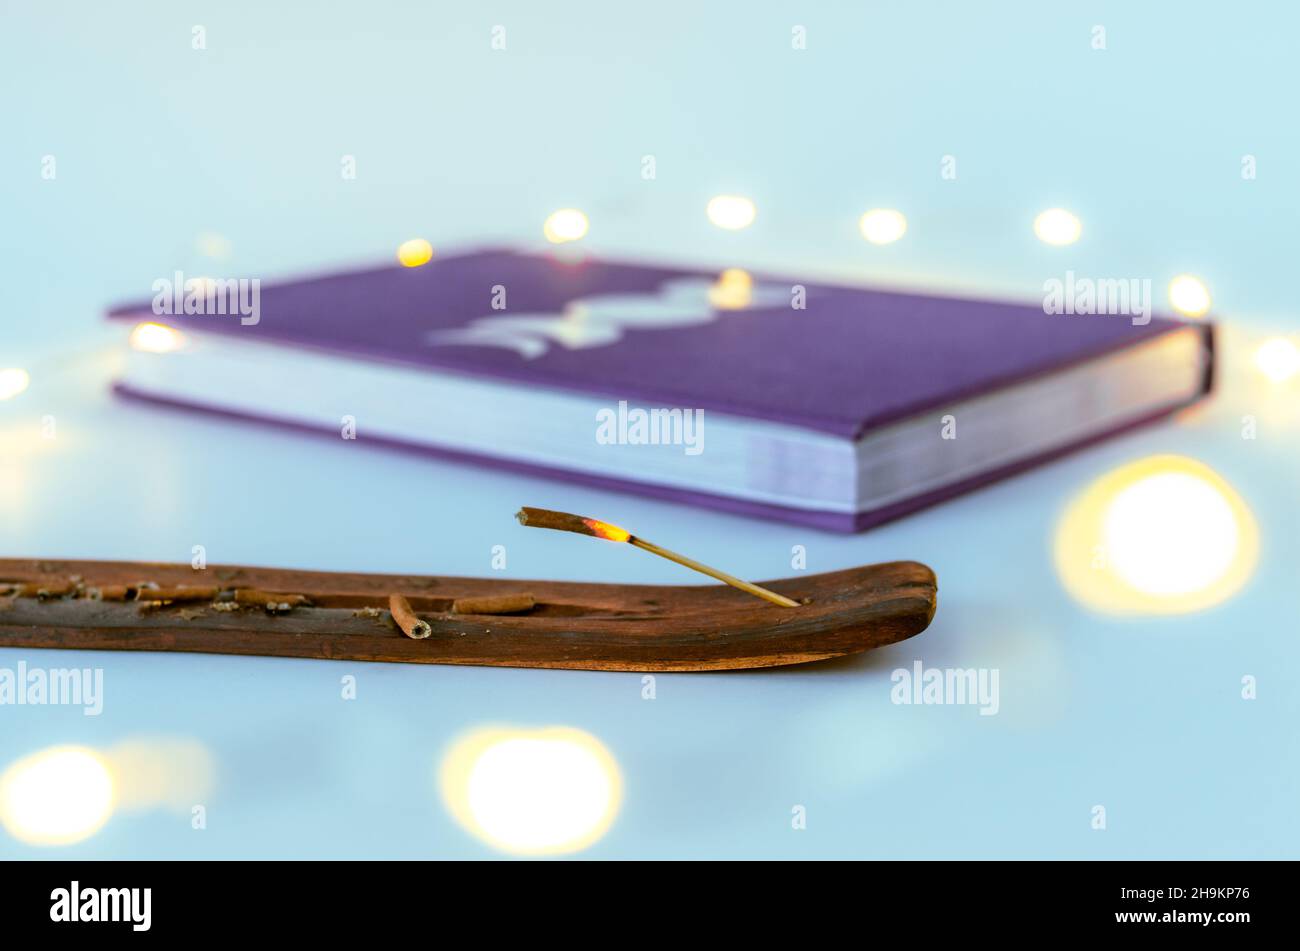 Close up incense stick burning with a moon journal with Christmas lights background. Concept: spiritual self care practices Stock Photo